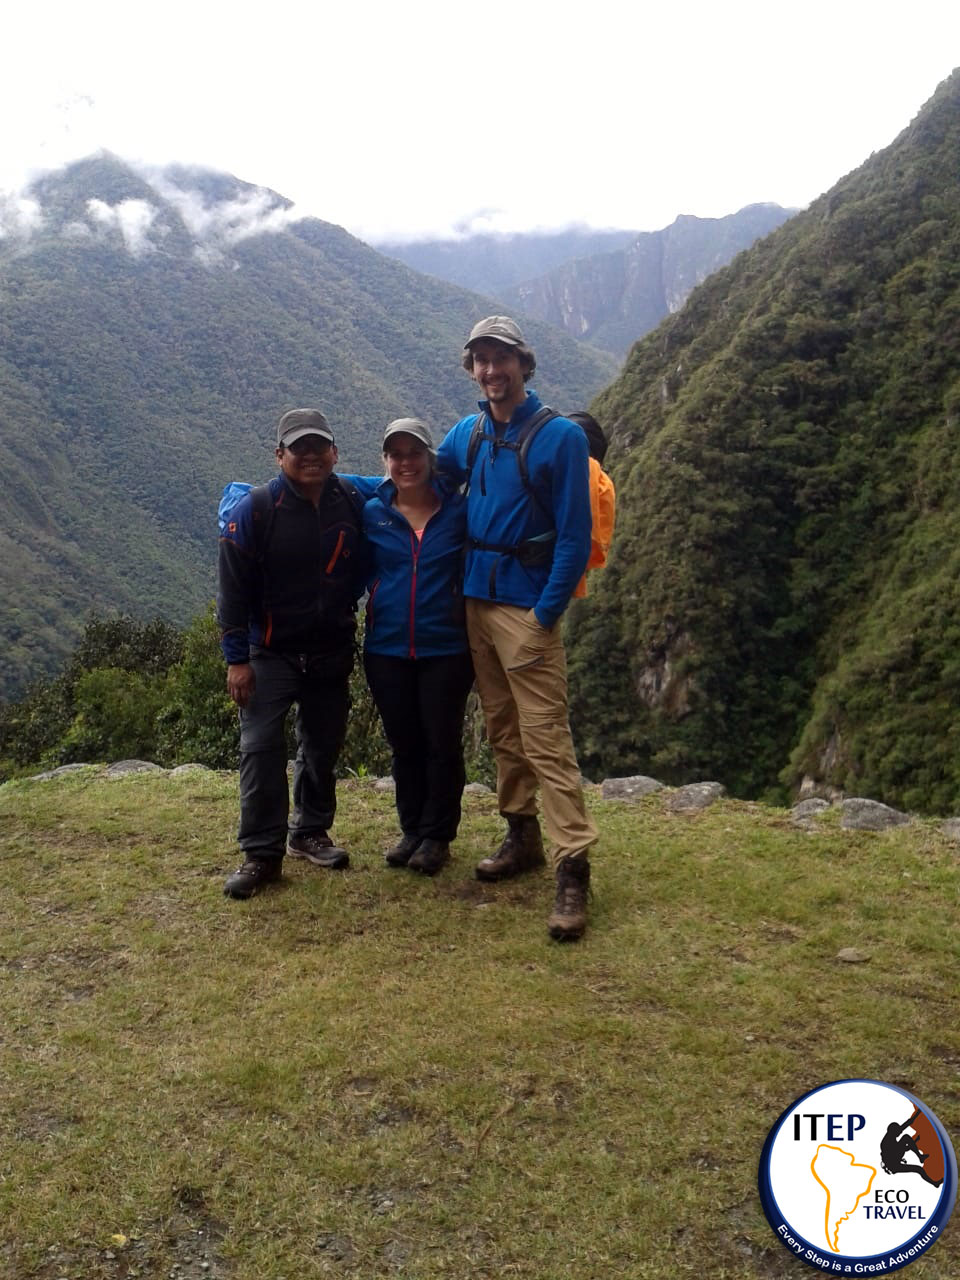 Short Inca Trail 2 days leaving on August 24th 2018 - Short Inca Trail 2 days leaving on August 24th 2018